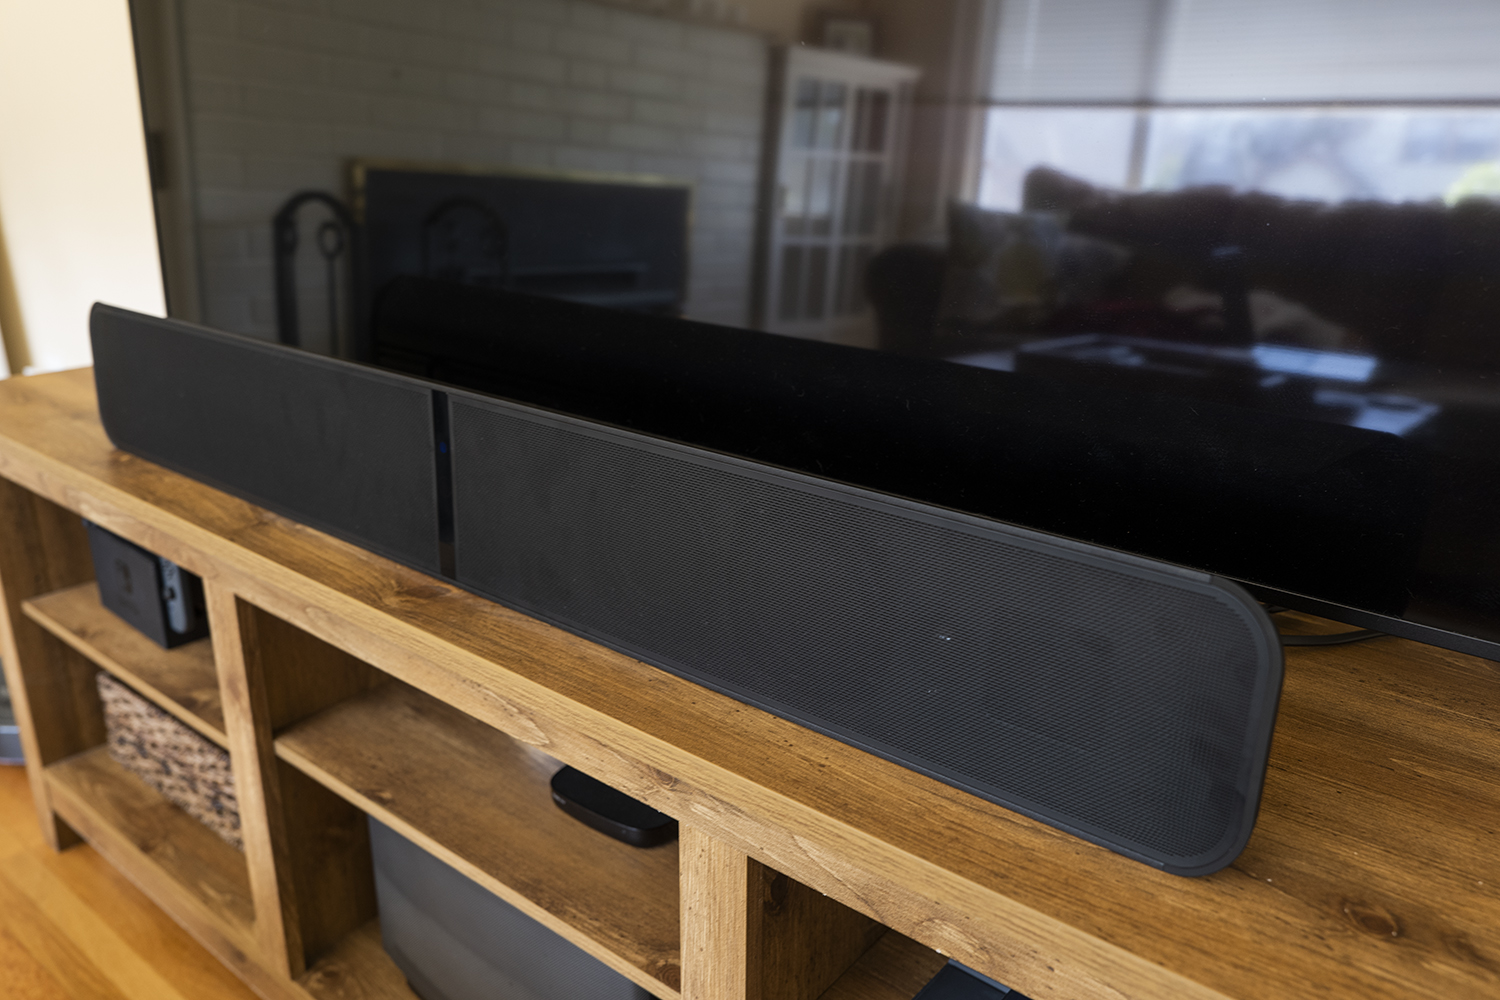 Missing That Rich Cinema Sound at Home. Try Sonos ARC SL Shadow: The Sleek Soundbar That Transforms Your Living Room